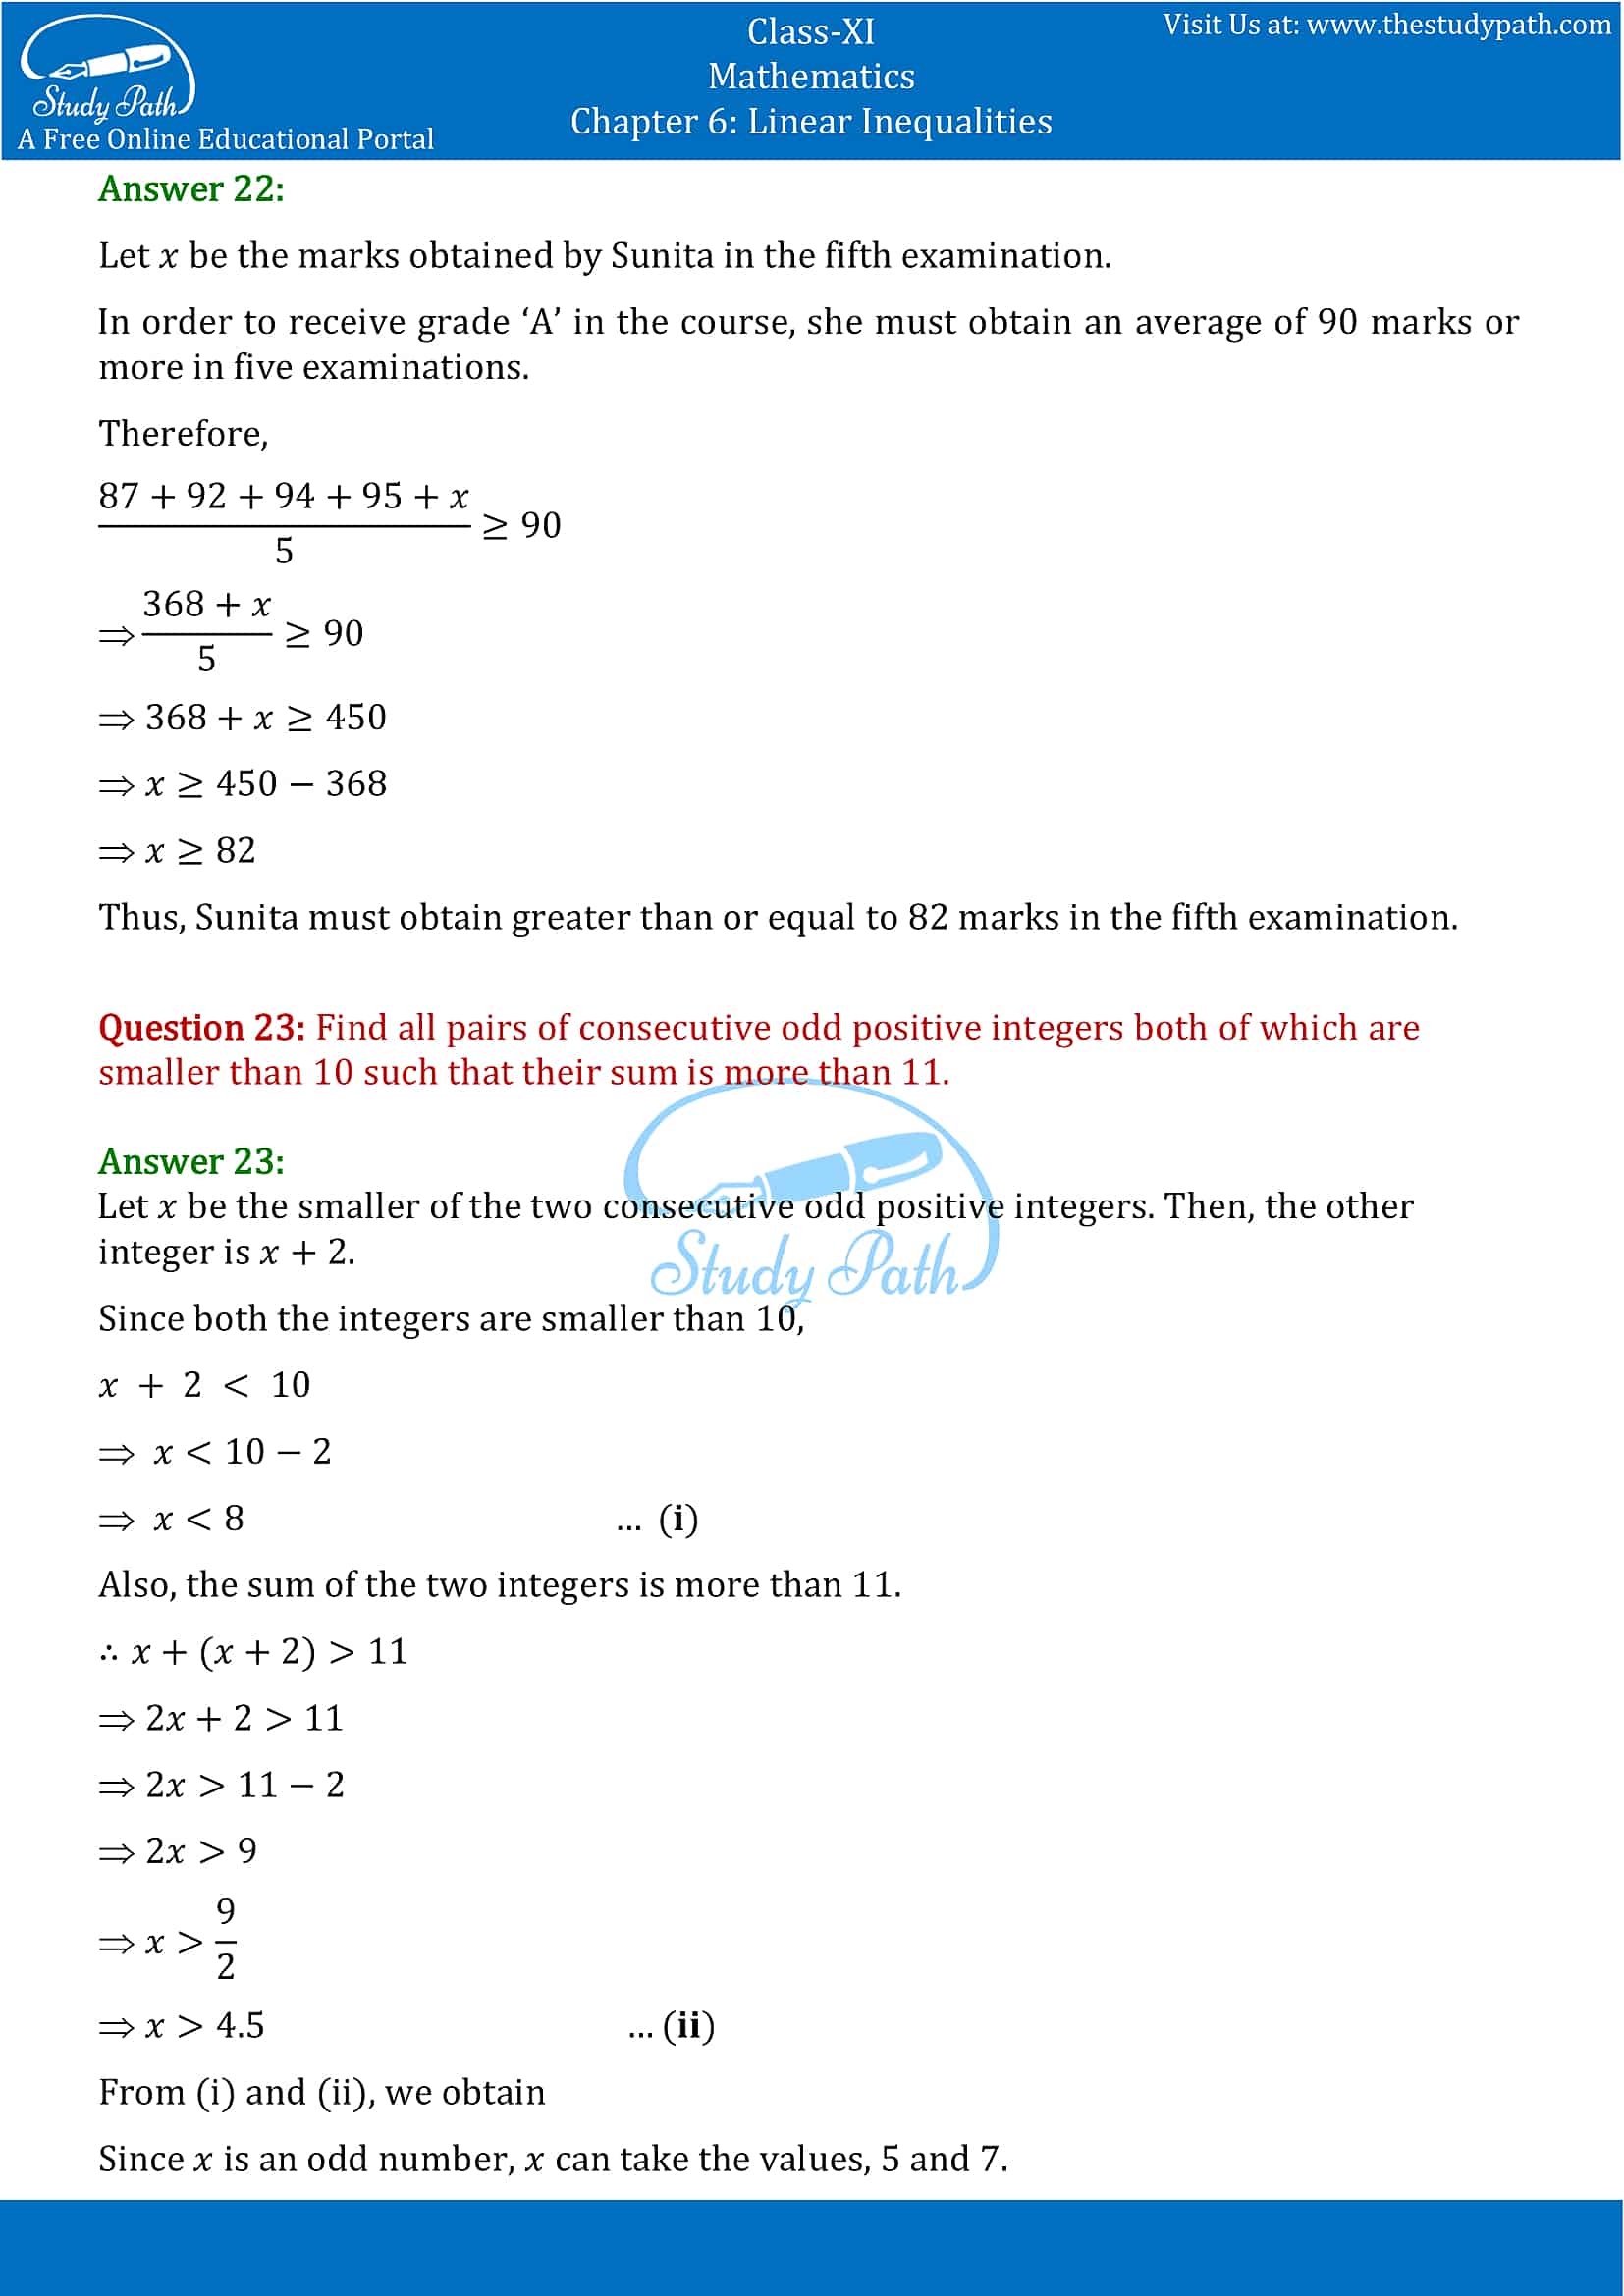 NCERT Solutions for Class 11 Maths chapter 6 Linear Inequalities Exercise 6.1 Part-11